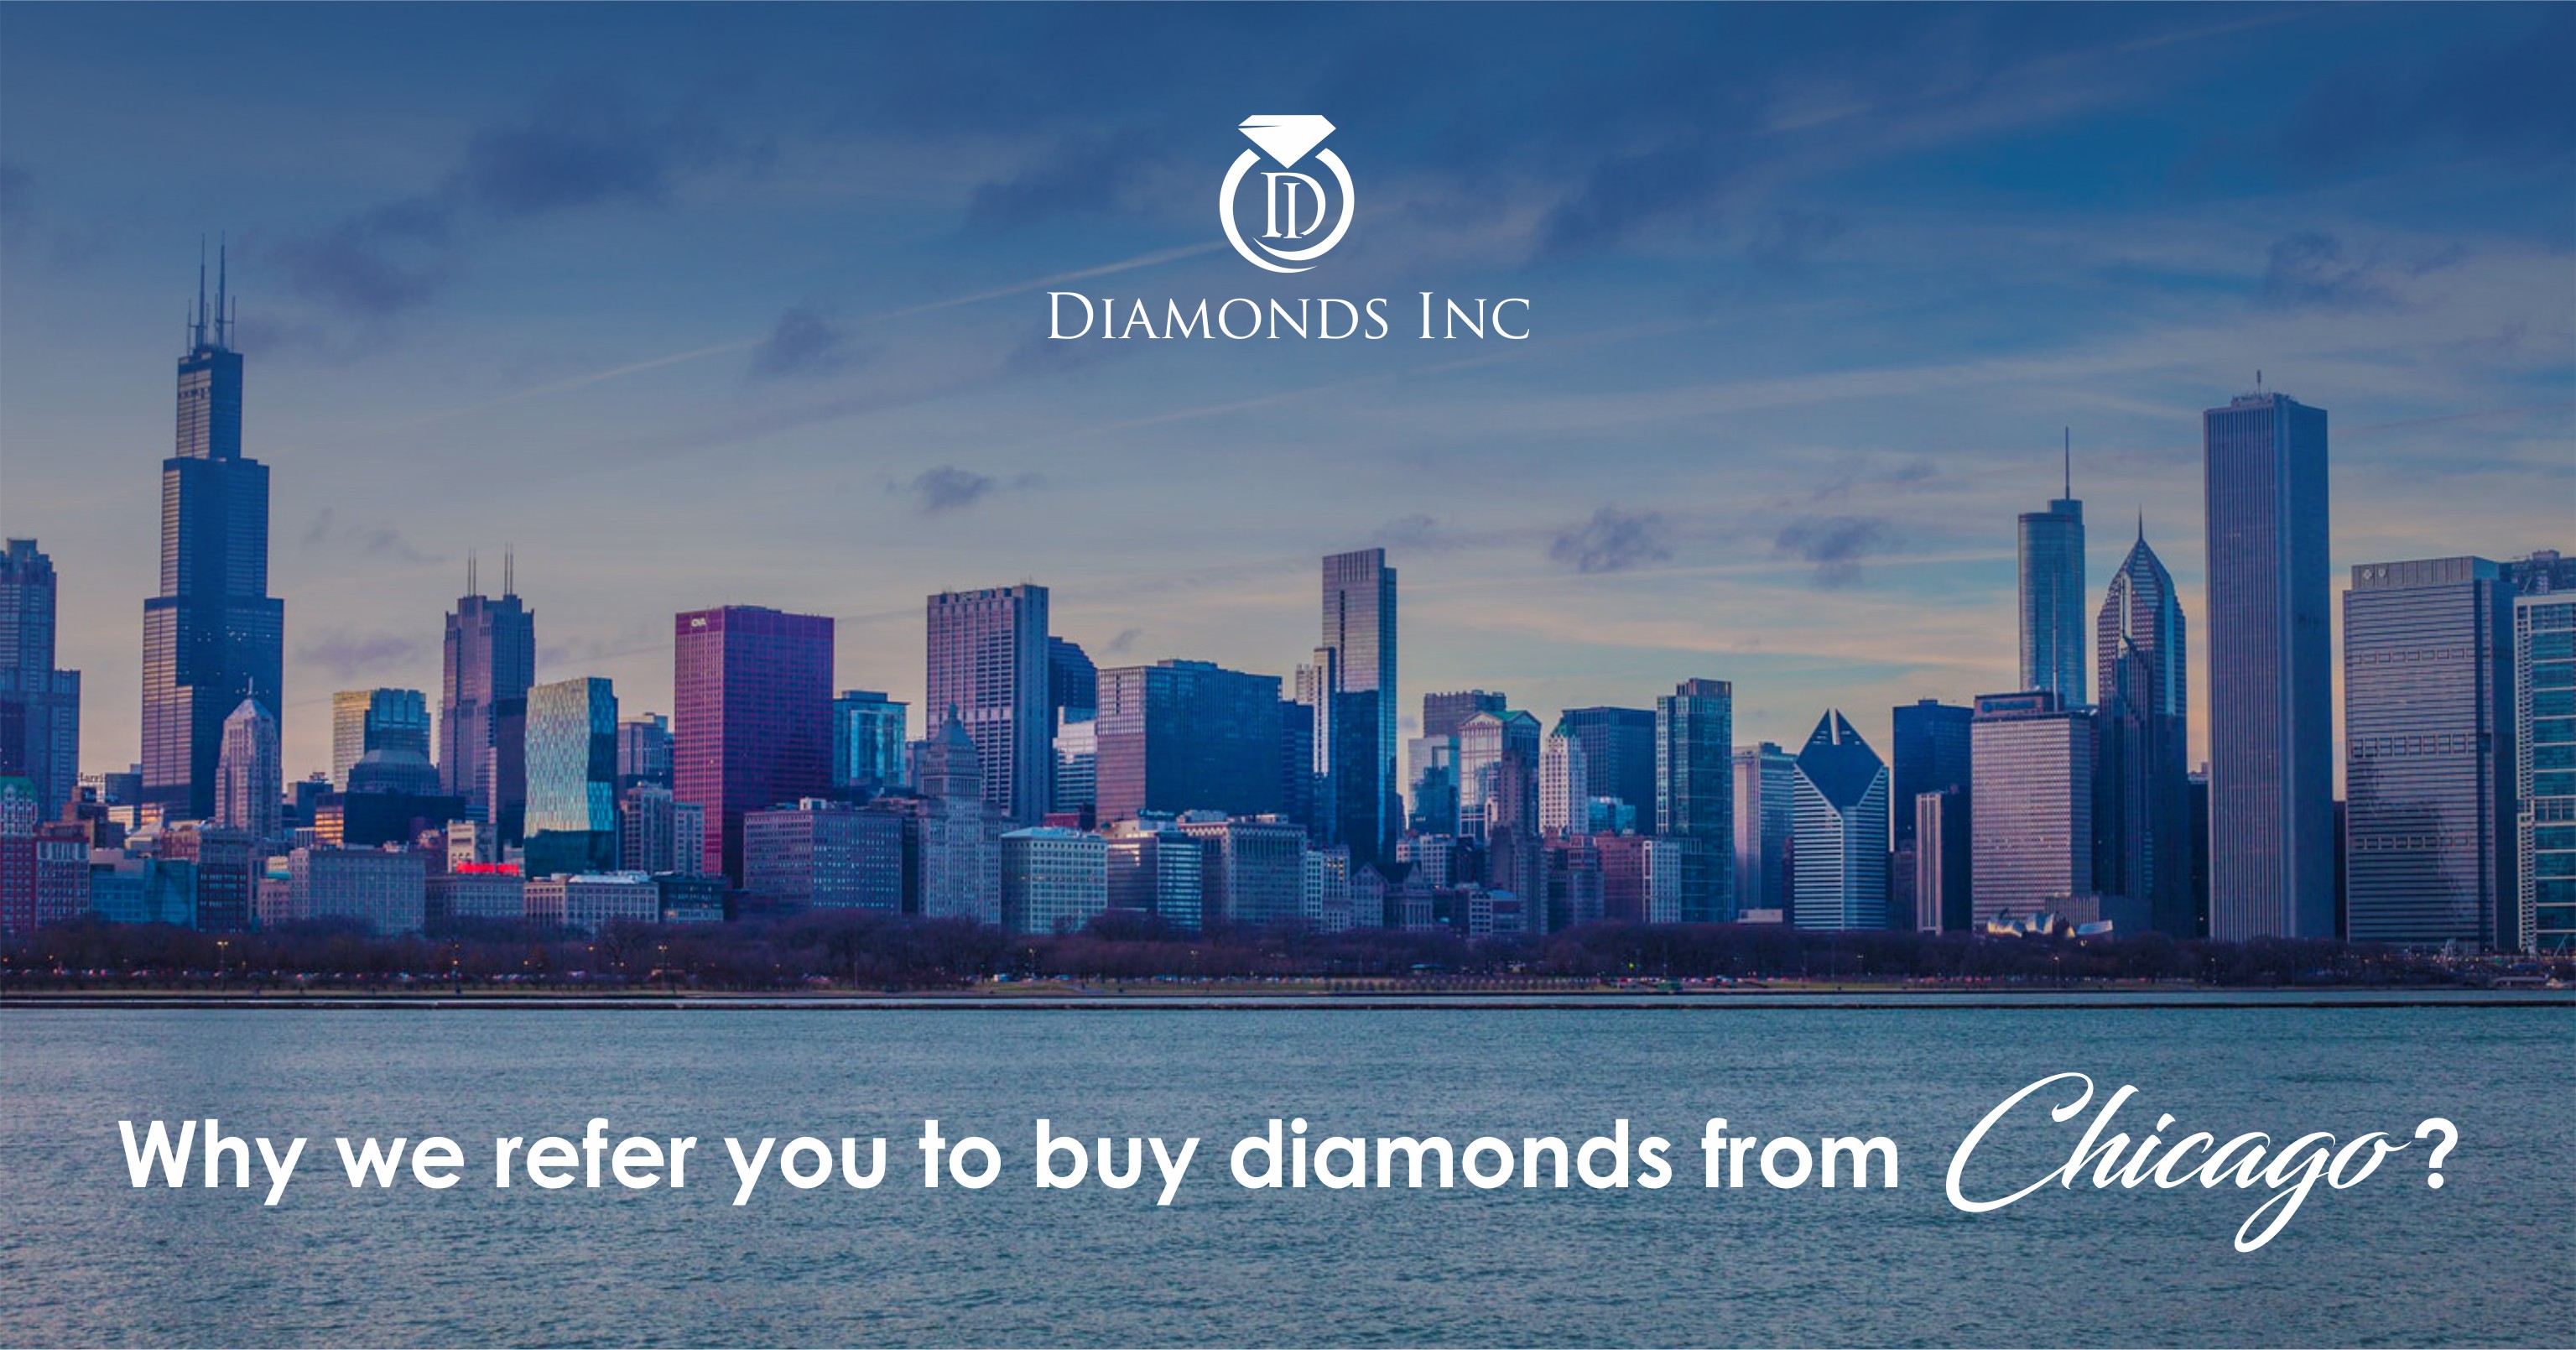 Why We Refer You to Buy Diamonds From Chicago